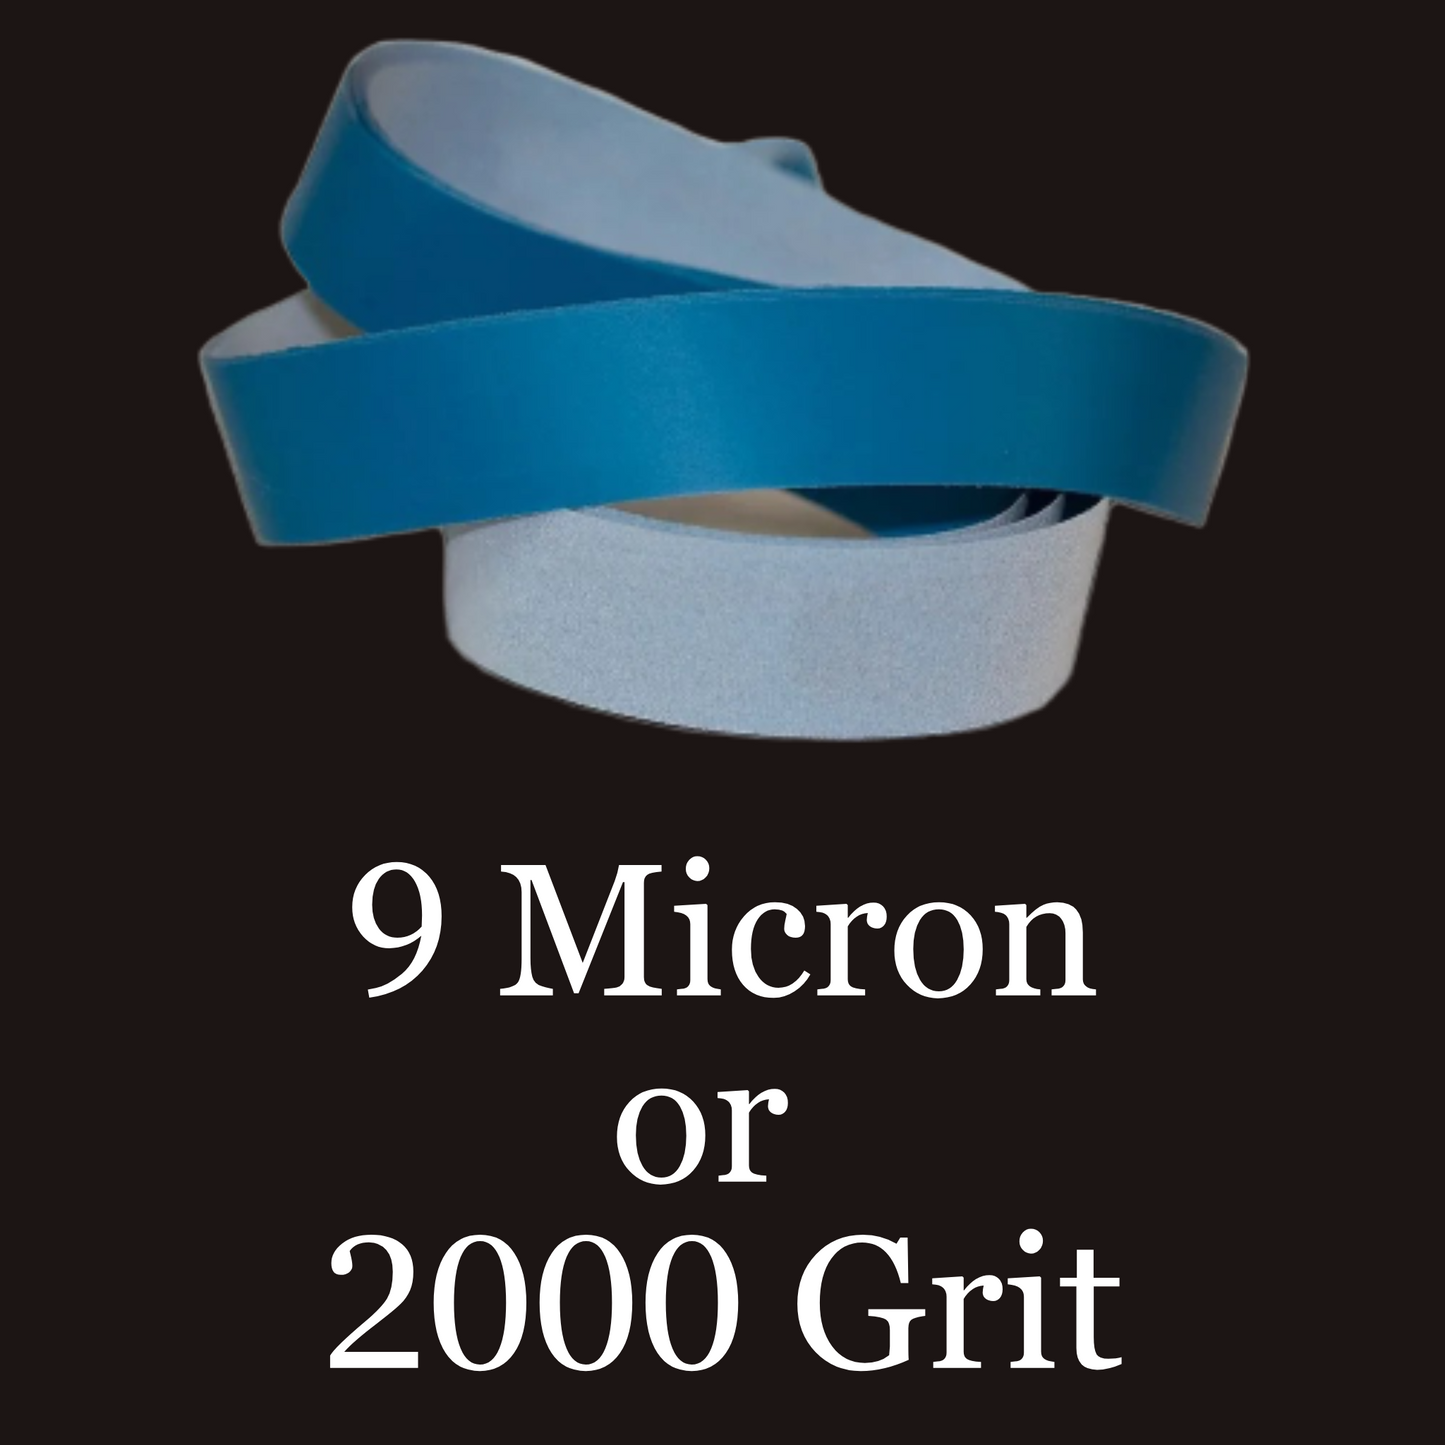 2” x 42” Film Micron Graded Finishing Belts 9 Micron or 2000 Grit